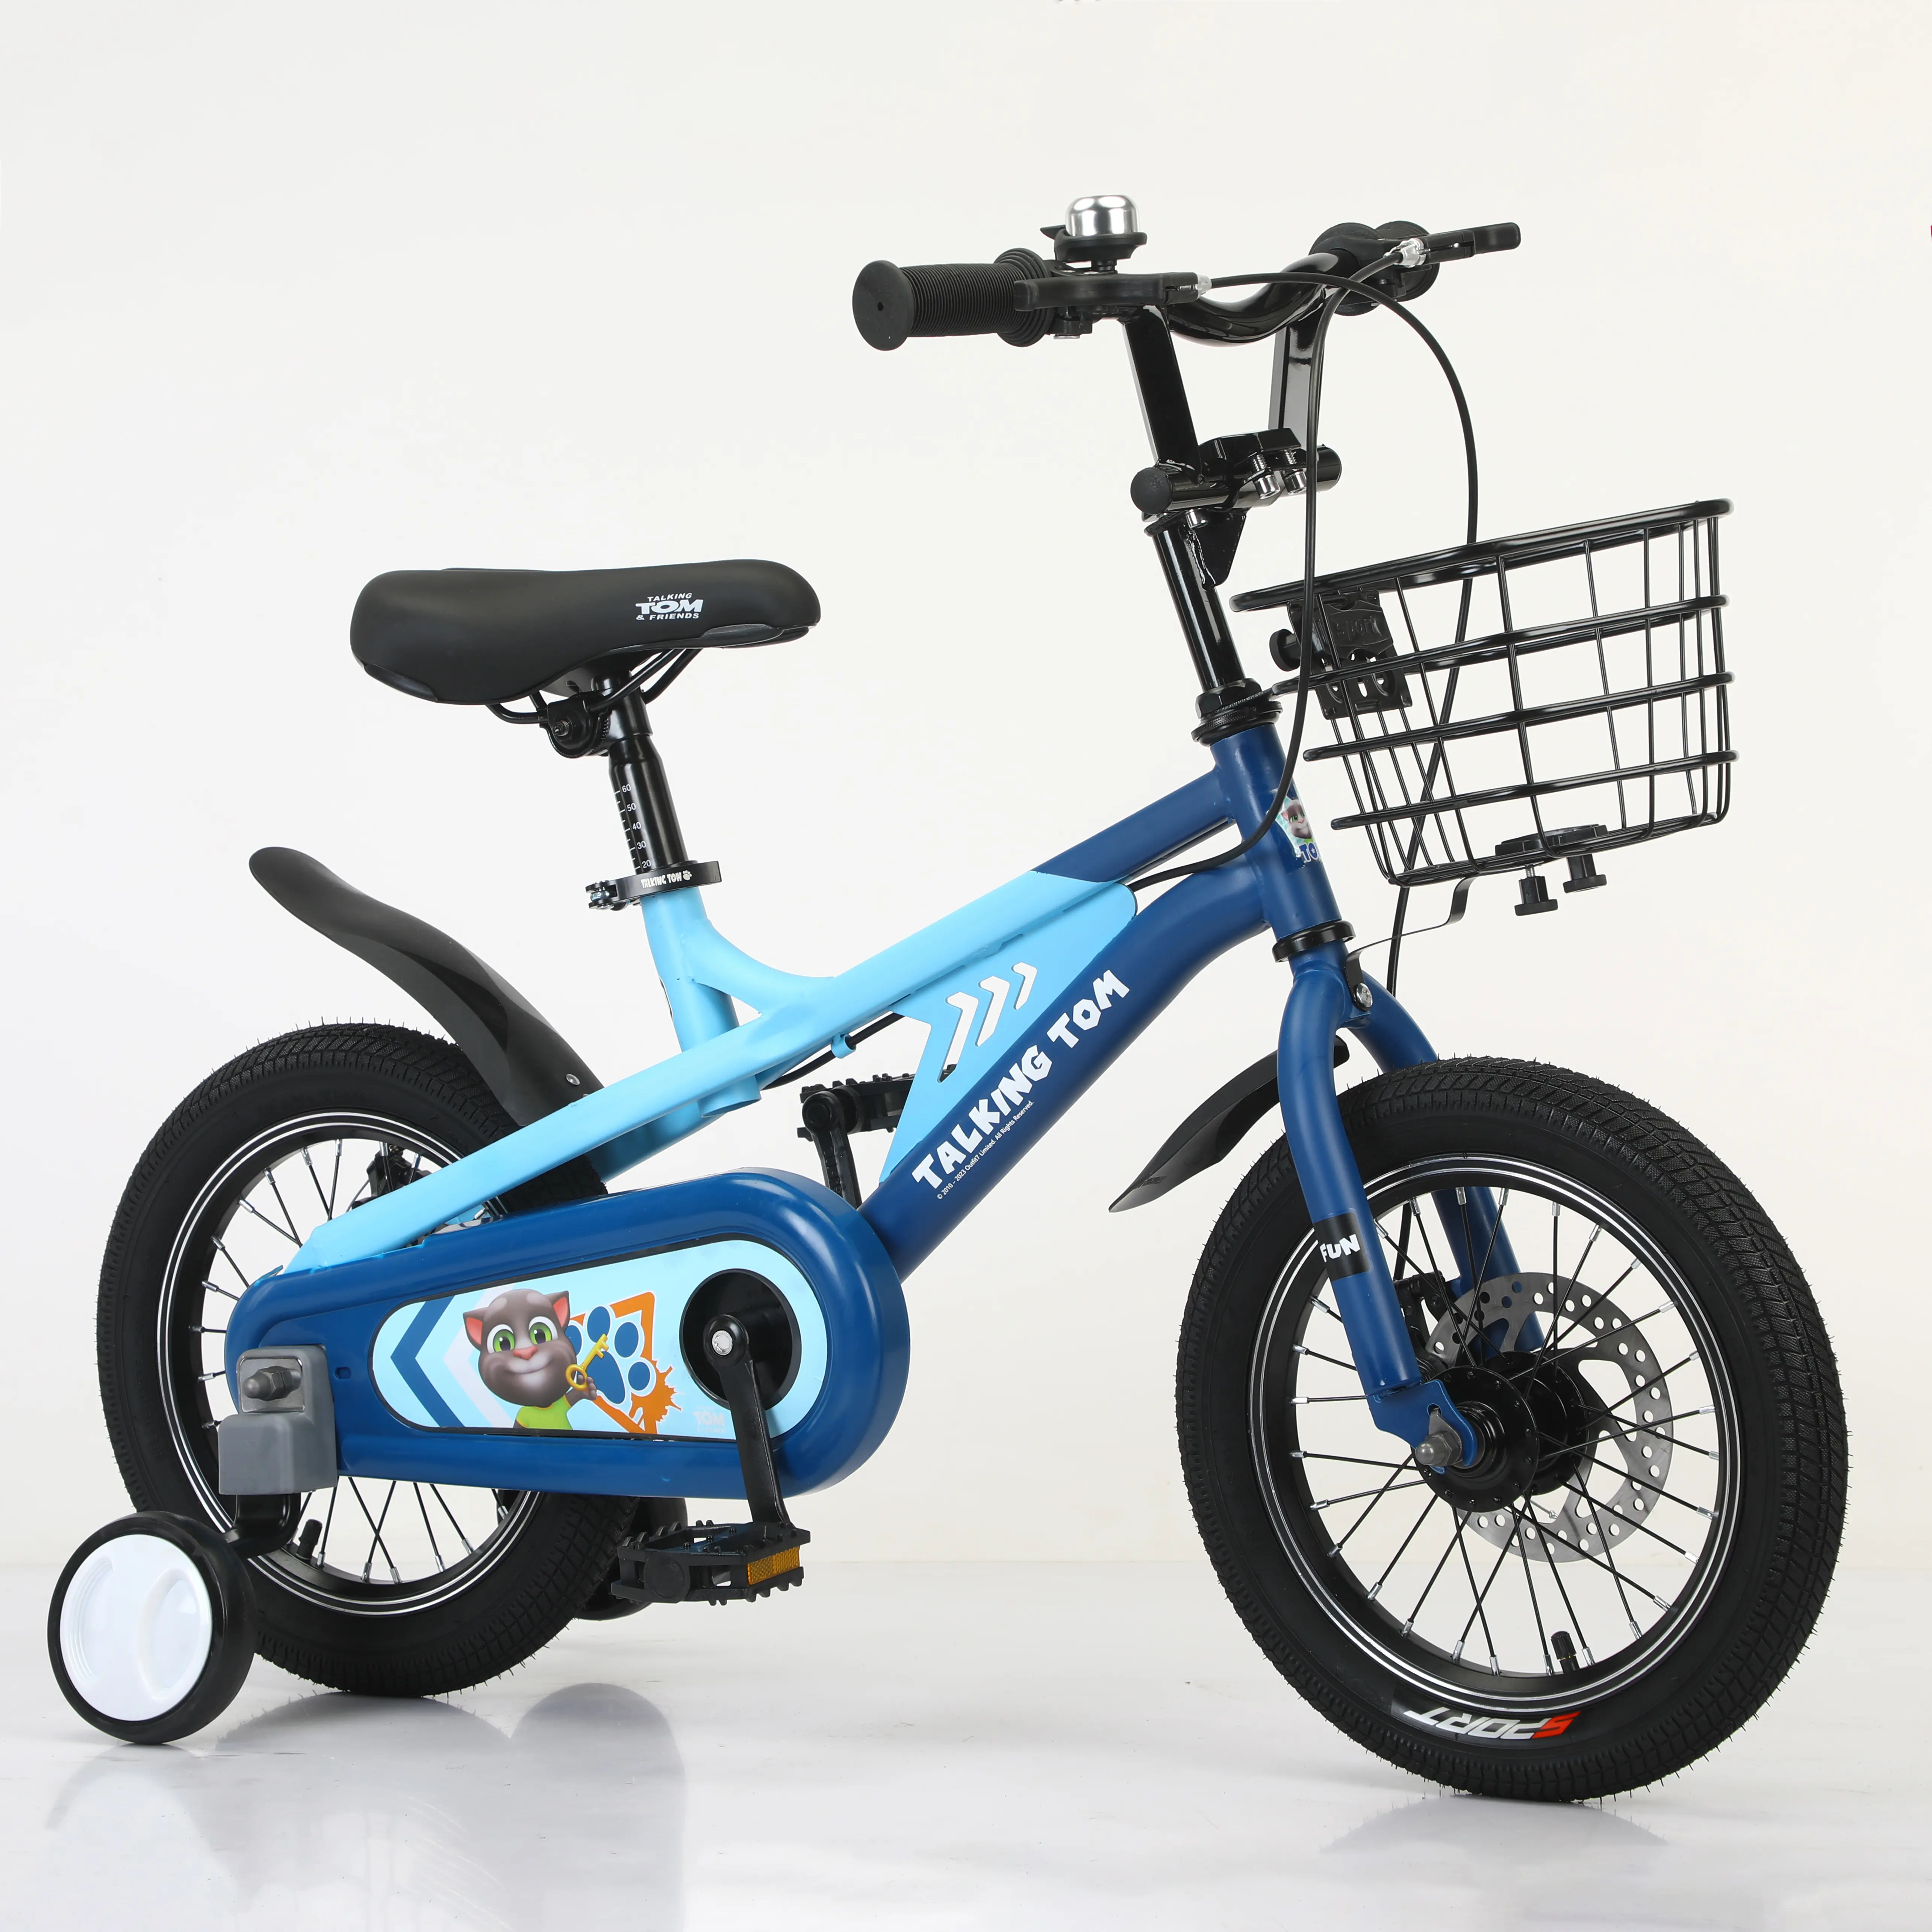 Factory Price Wholesale Magnesium Alloy 12 Inch Kid Bicycle For 3 Years Old Children BMX Bicycle Kid Bike